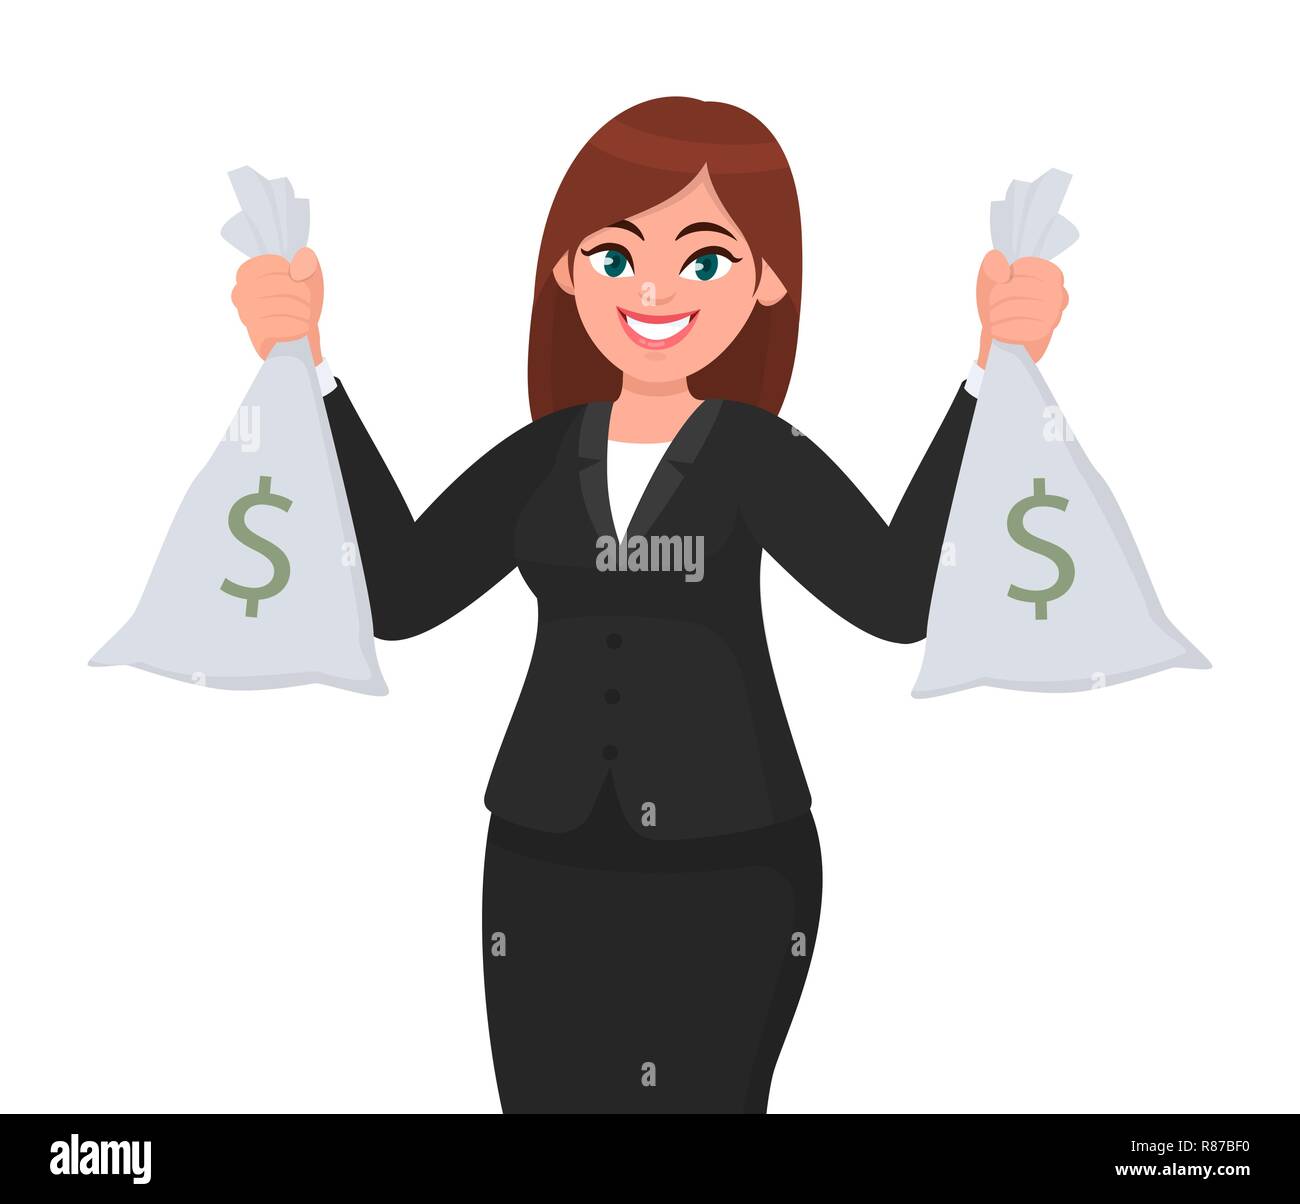 Successful happy businesswoman holding cash/money or currency bags in hands.  Business and finance concept illustration in vector cartoon style. Stock Vector